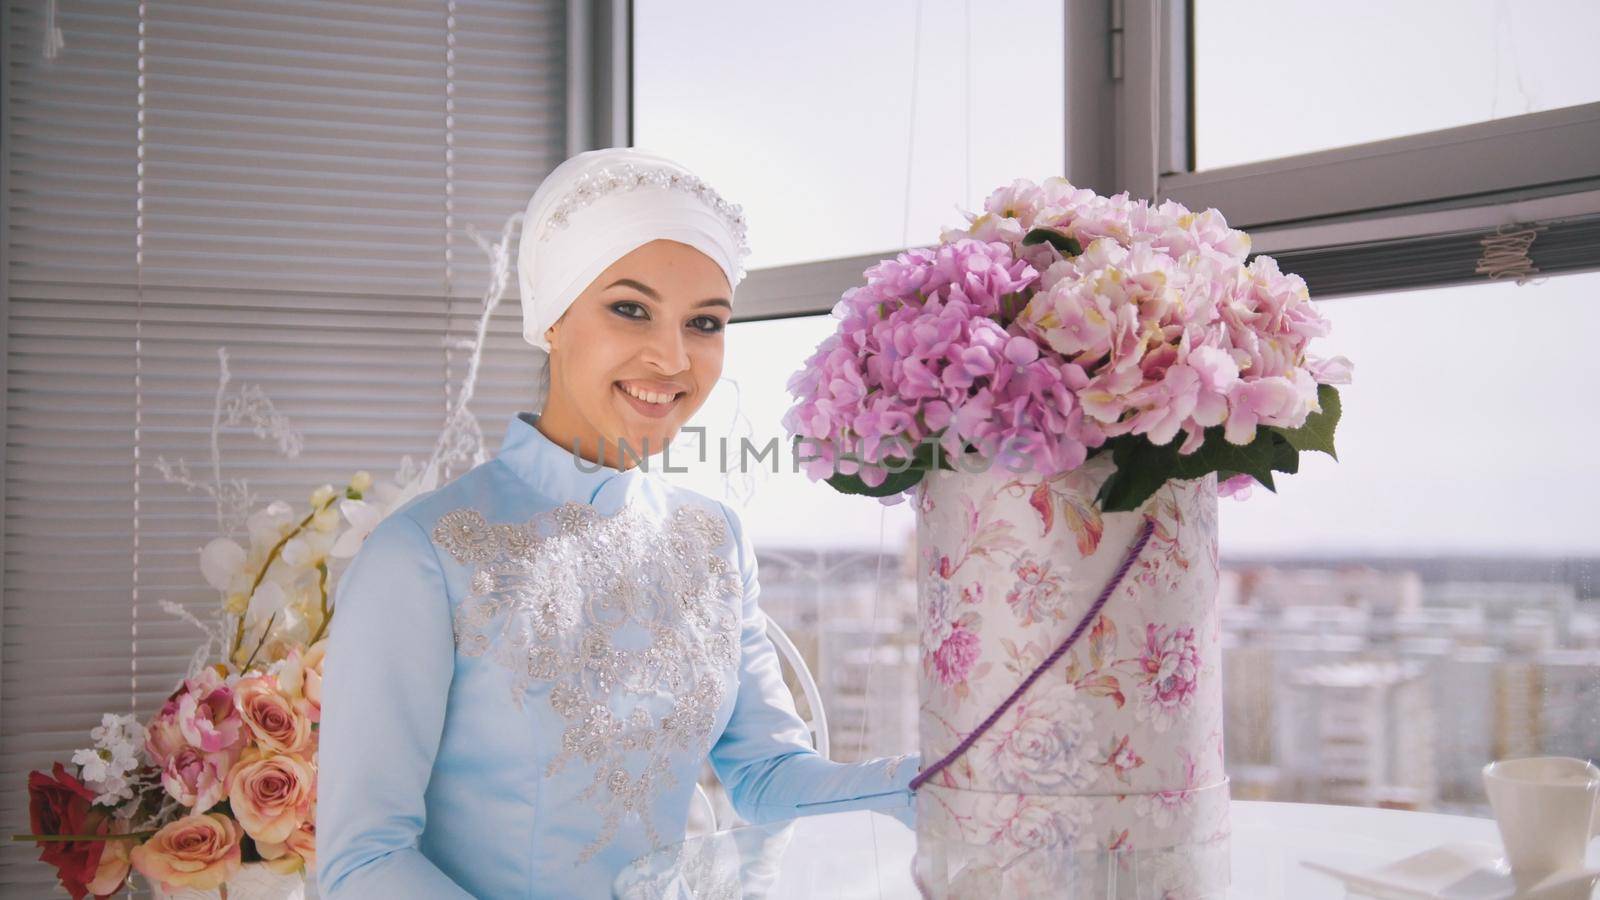 Portrait of smiling muslim bride in wedding dress with flowers sitting by the window, horizontal